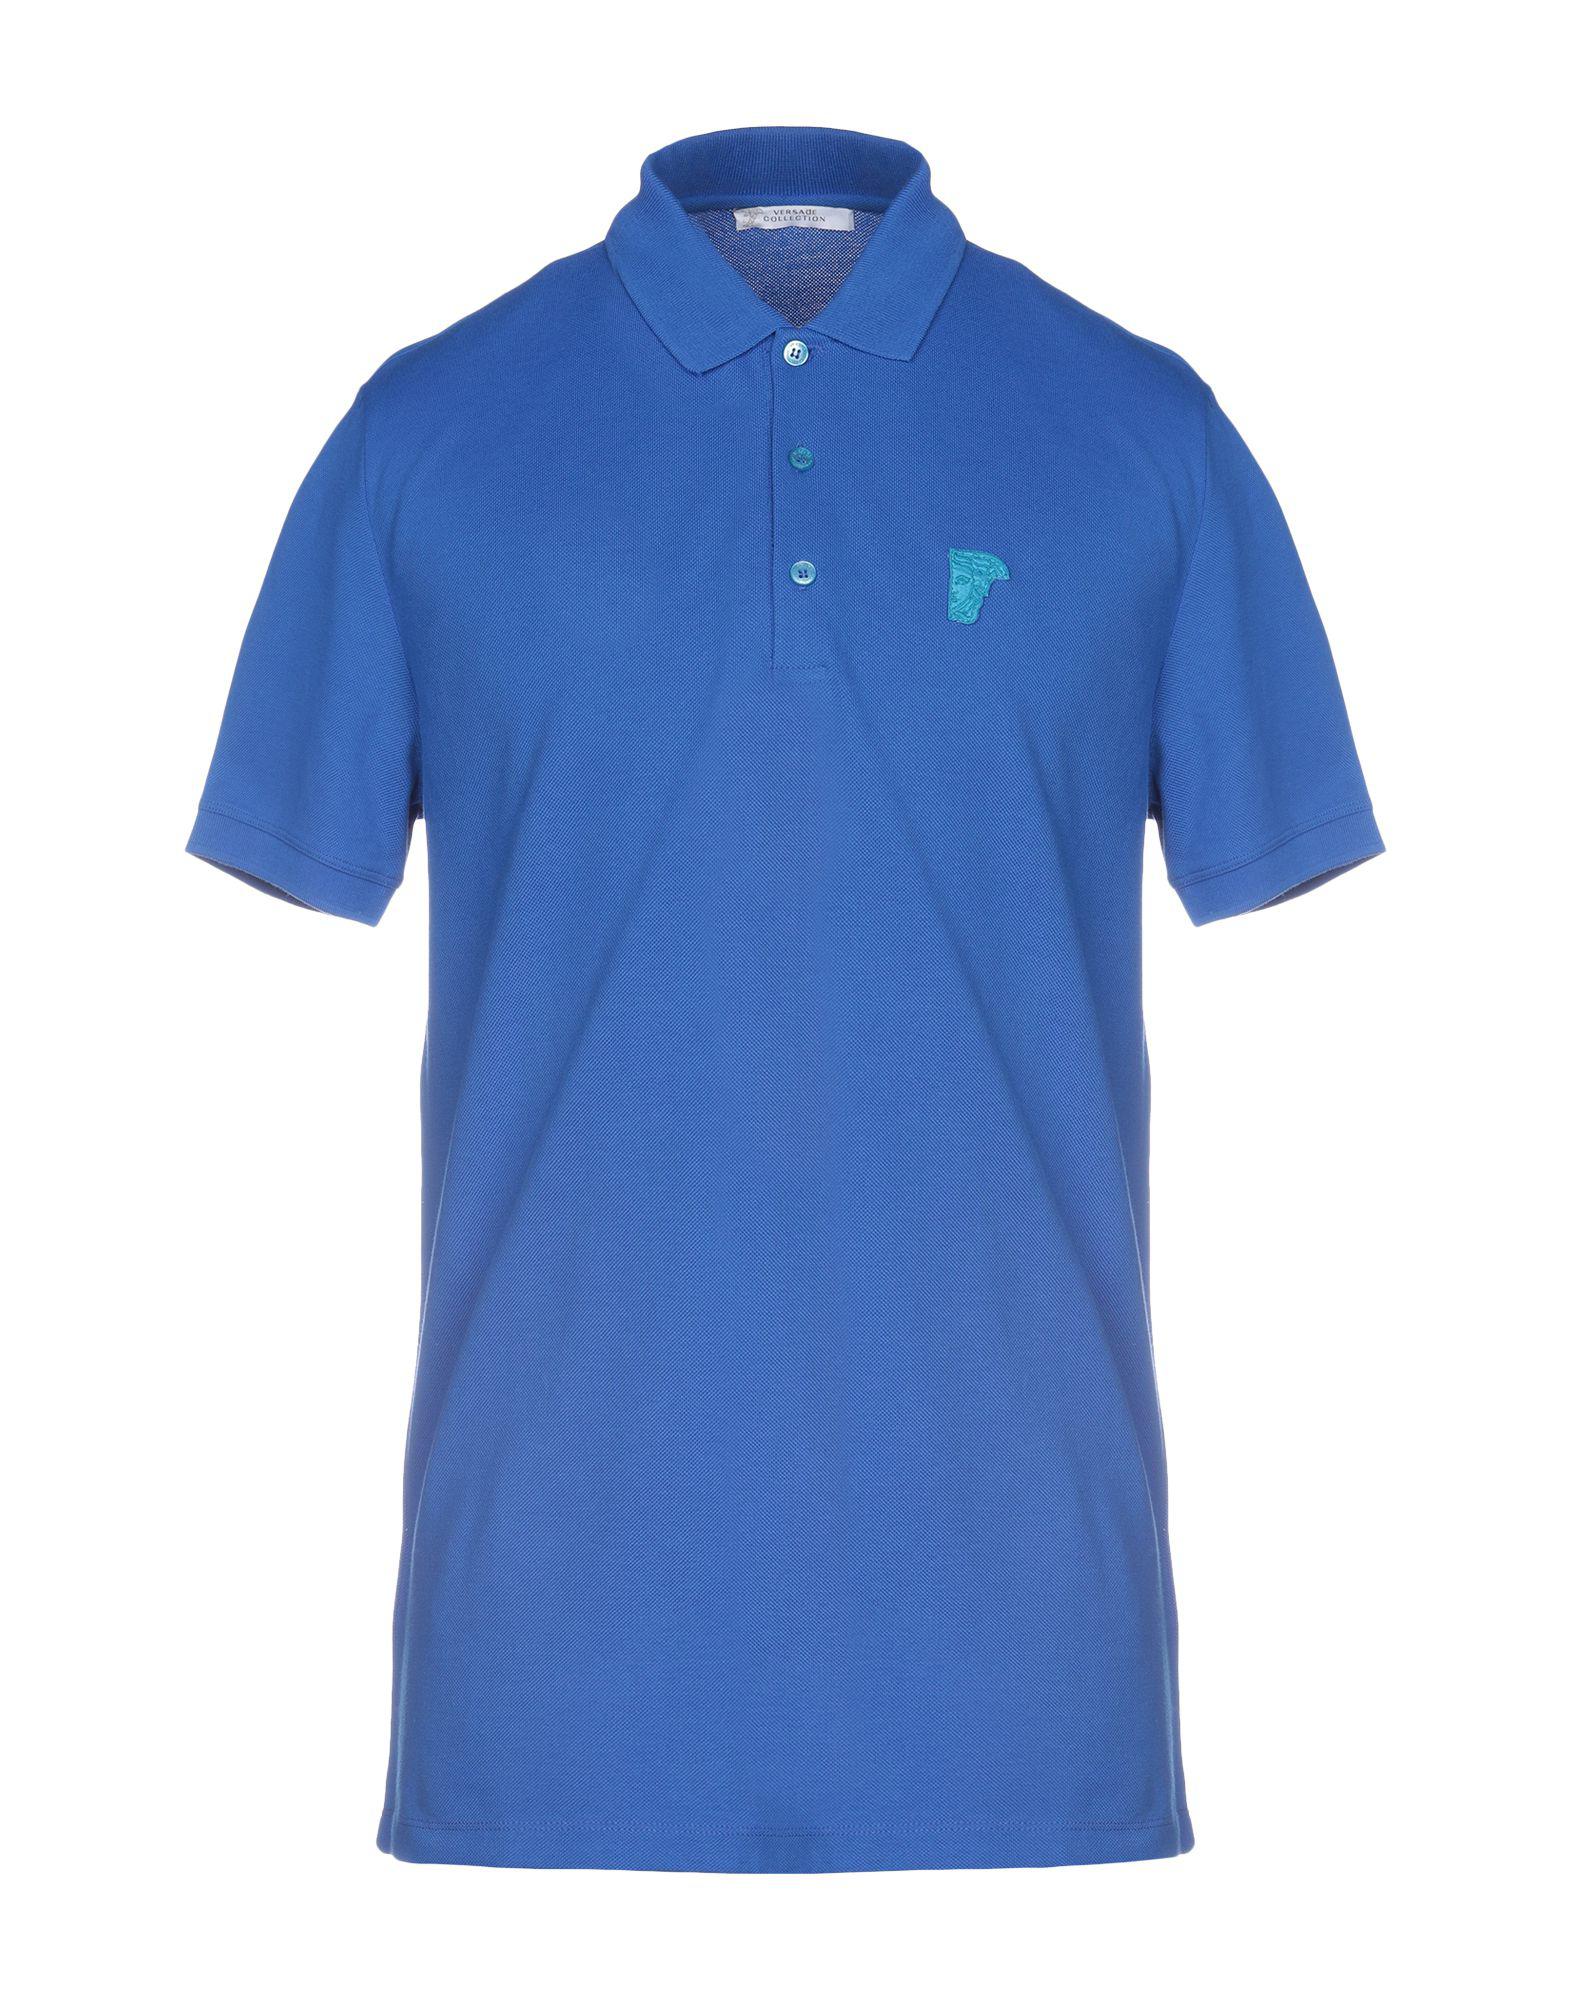 Versace Cotton Polo Shirt in Azure (Blue) for Men - Save 27% - Lyst